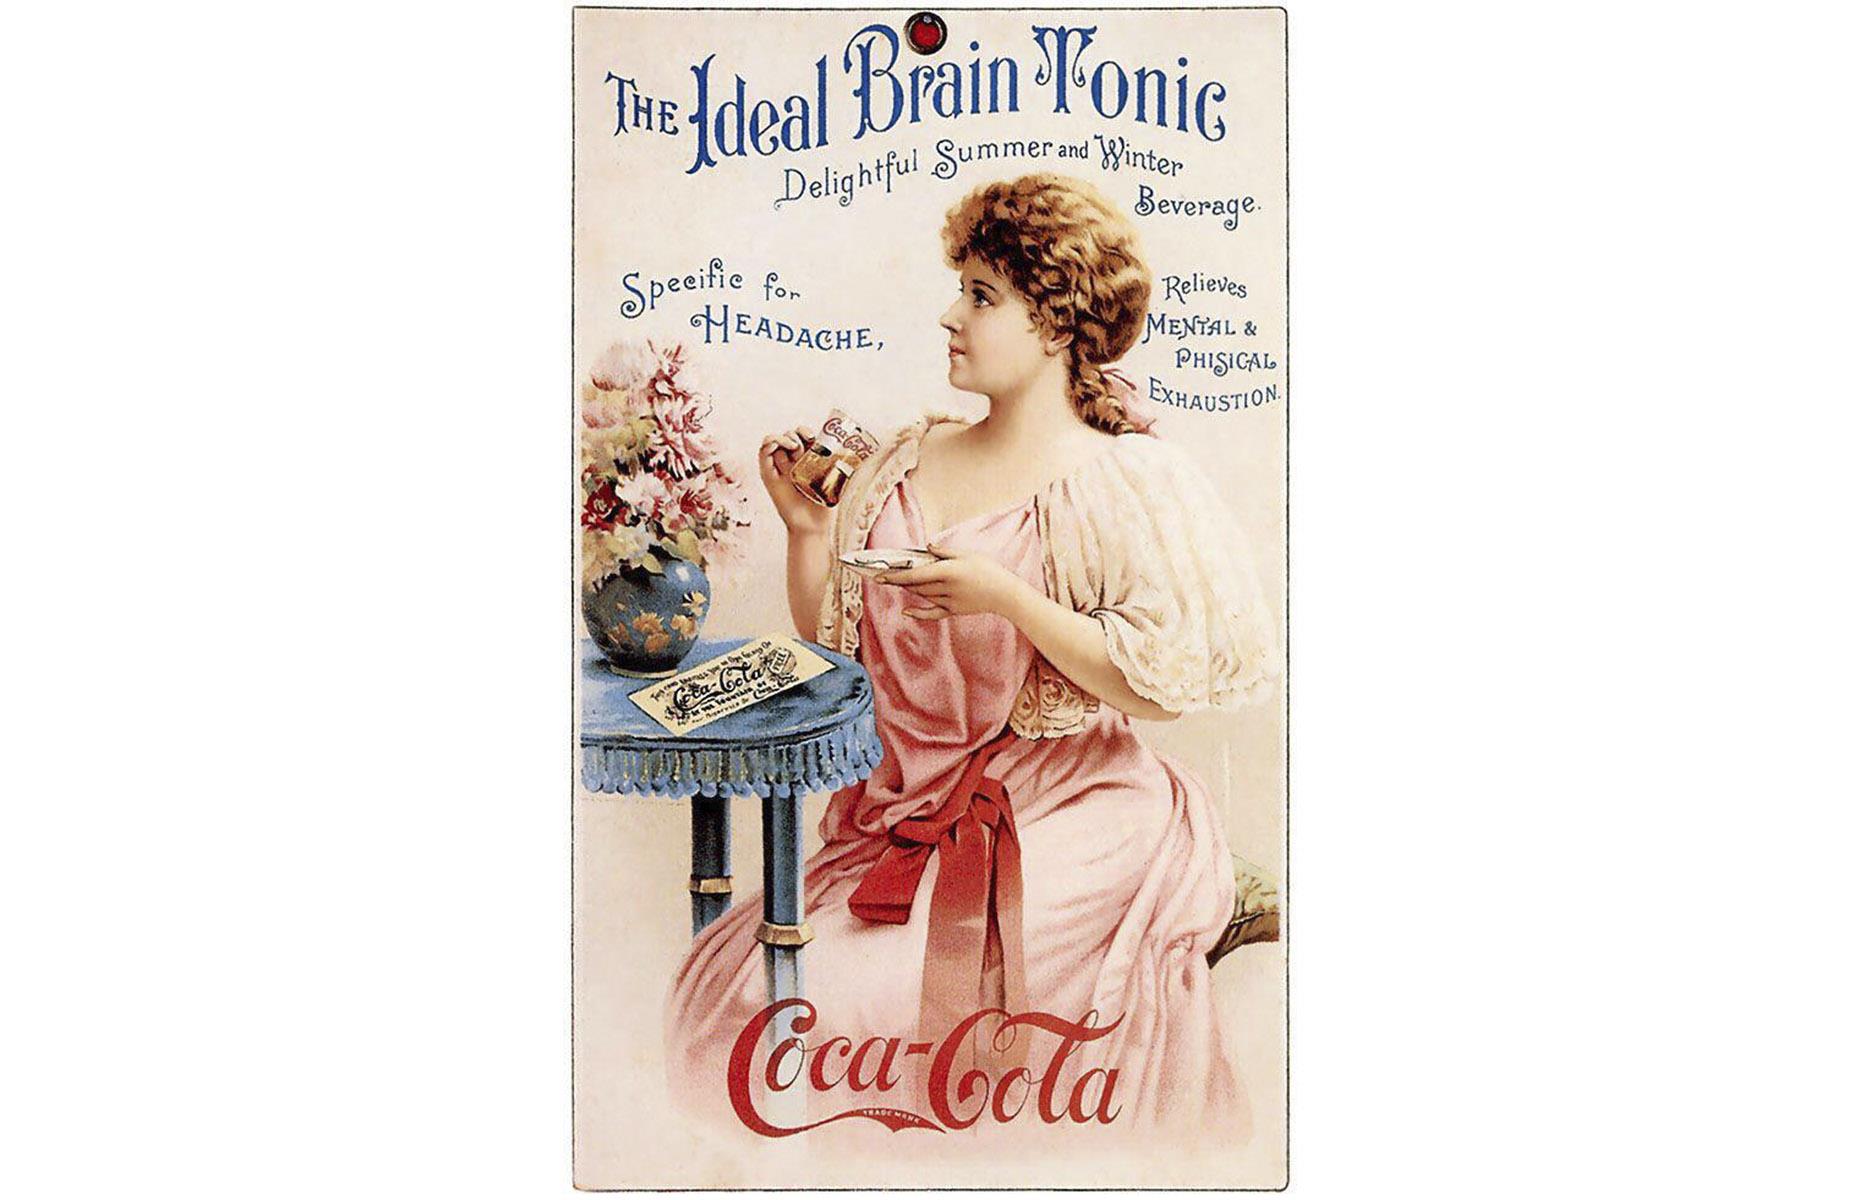 Invented by pharmacist John Pemberton in 1886, Coca-Cola was originally advertised as a brain tonic to relieve headaches and exhaustion. It contained ingredients from the kola nut, including caffeine, and also cocaine – but not as much as people think. There was only nine milligrams per glass and it was removed in 1903. Pictured is a vintage Coca-Cola advert from the 1890s.